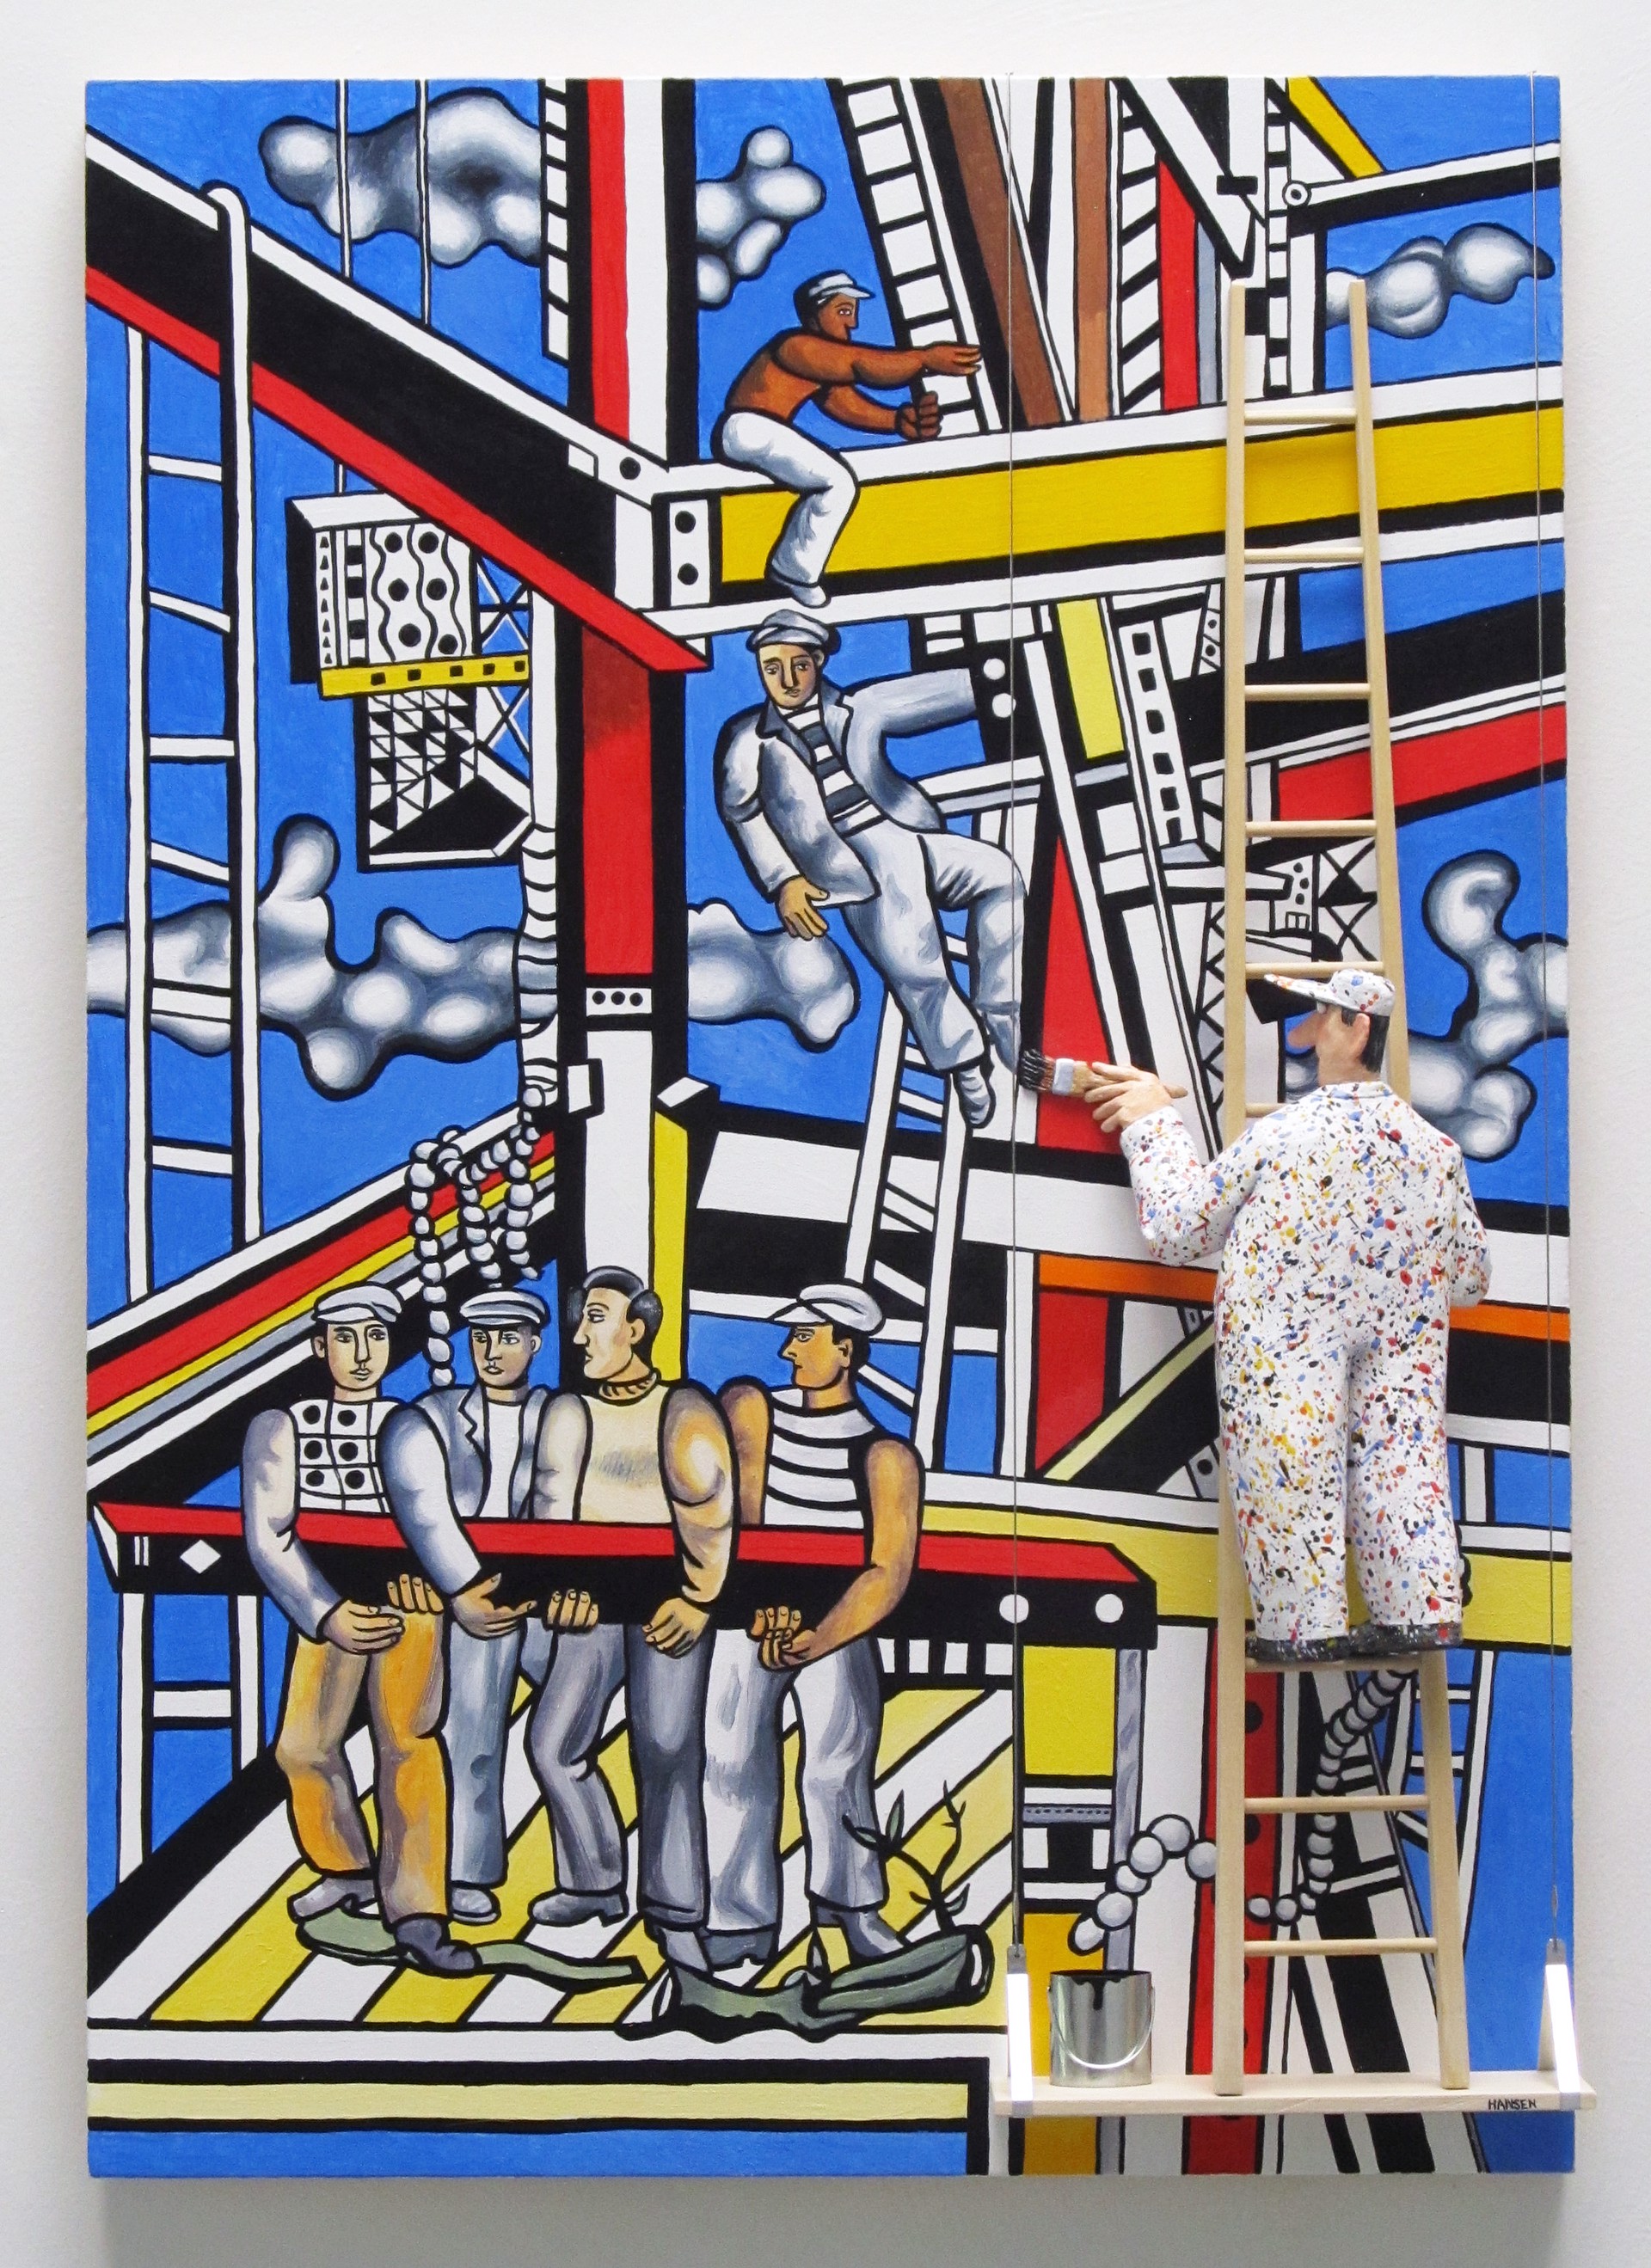 Construction Workers, Final State (Leger) by Stephen Hansen